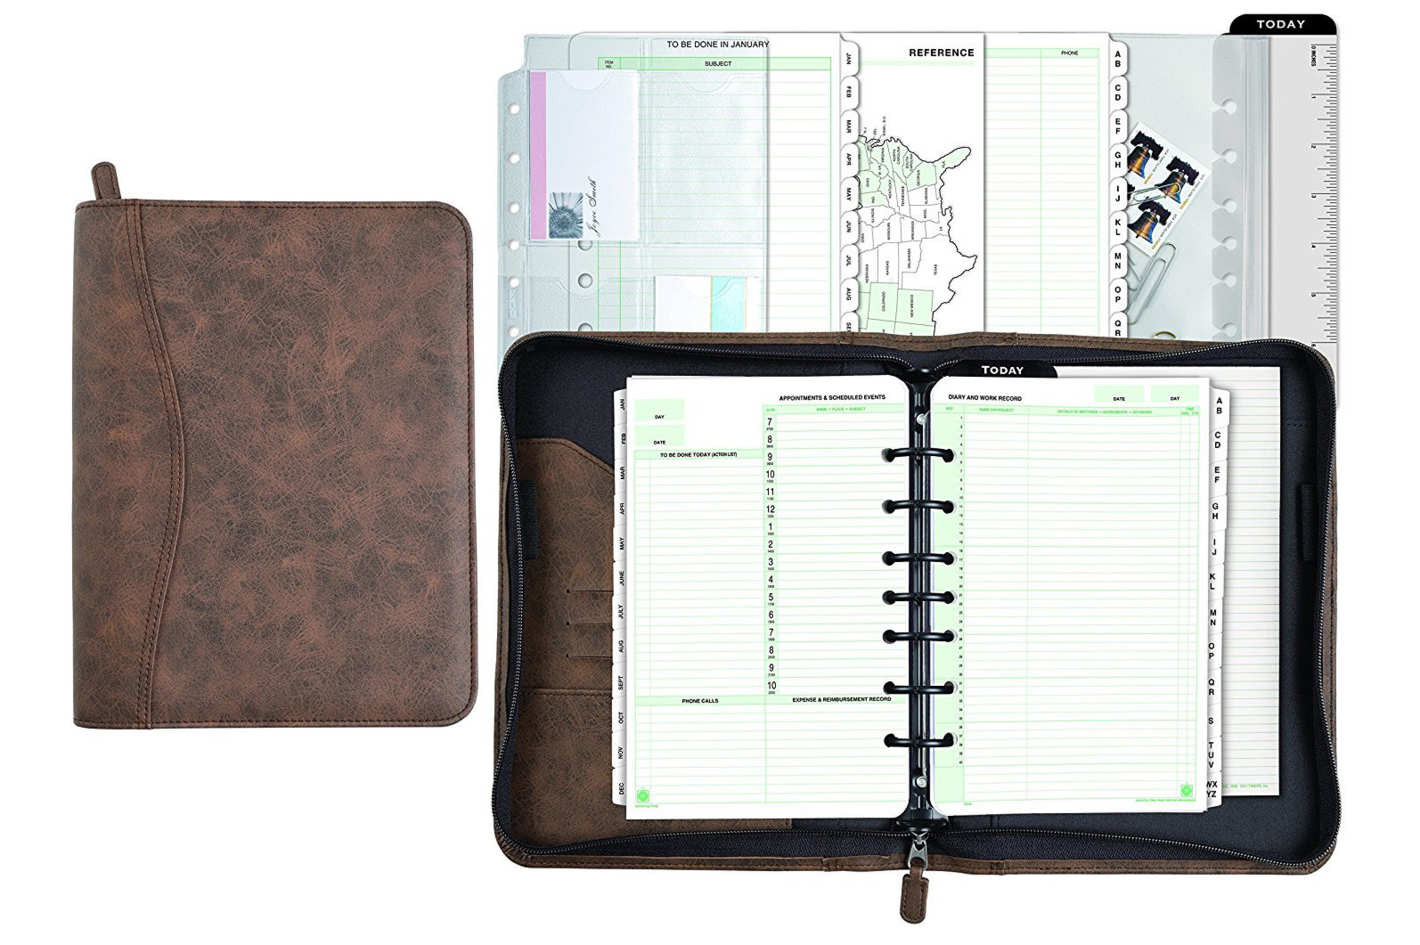 Best Planner organizer Inspirational 10 Best Planners for 2019 According to Productivity Experts